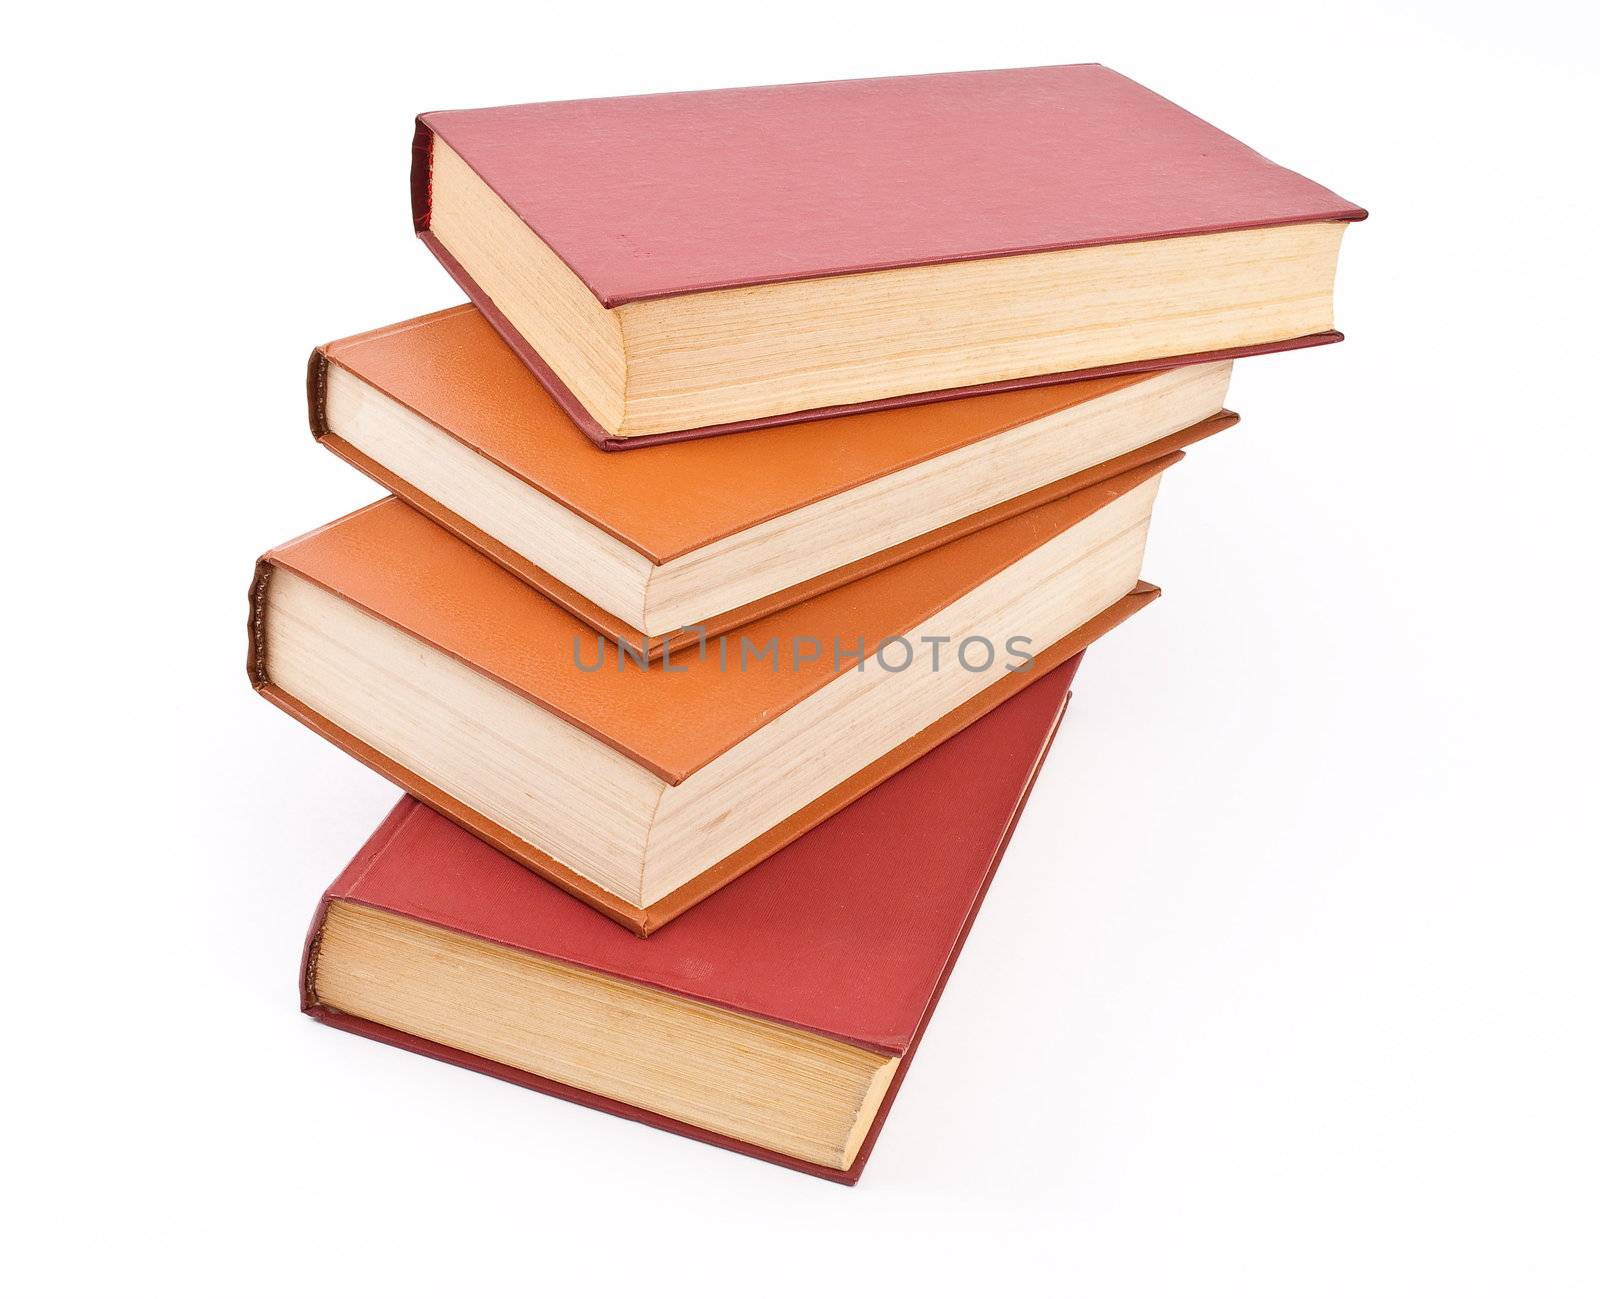 Stack of books by SeDmi